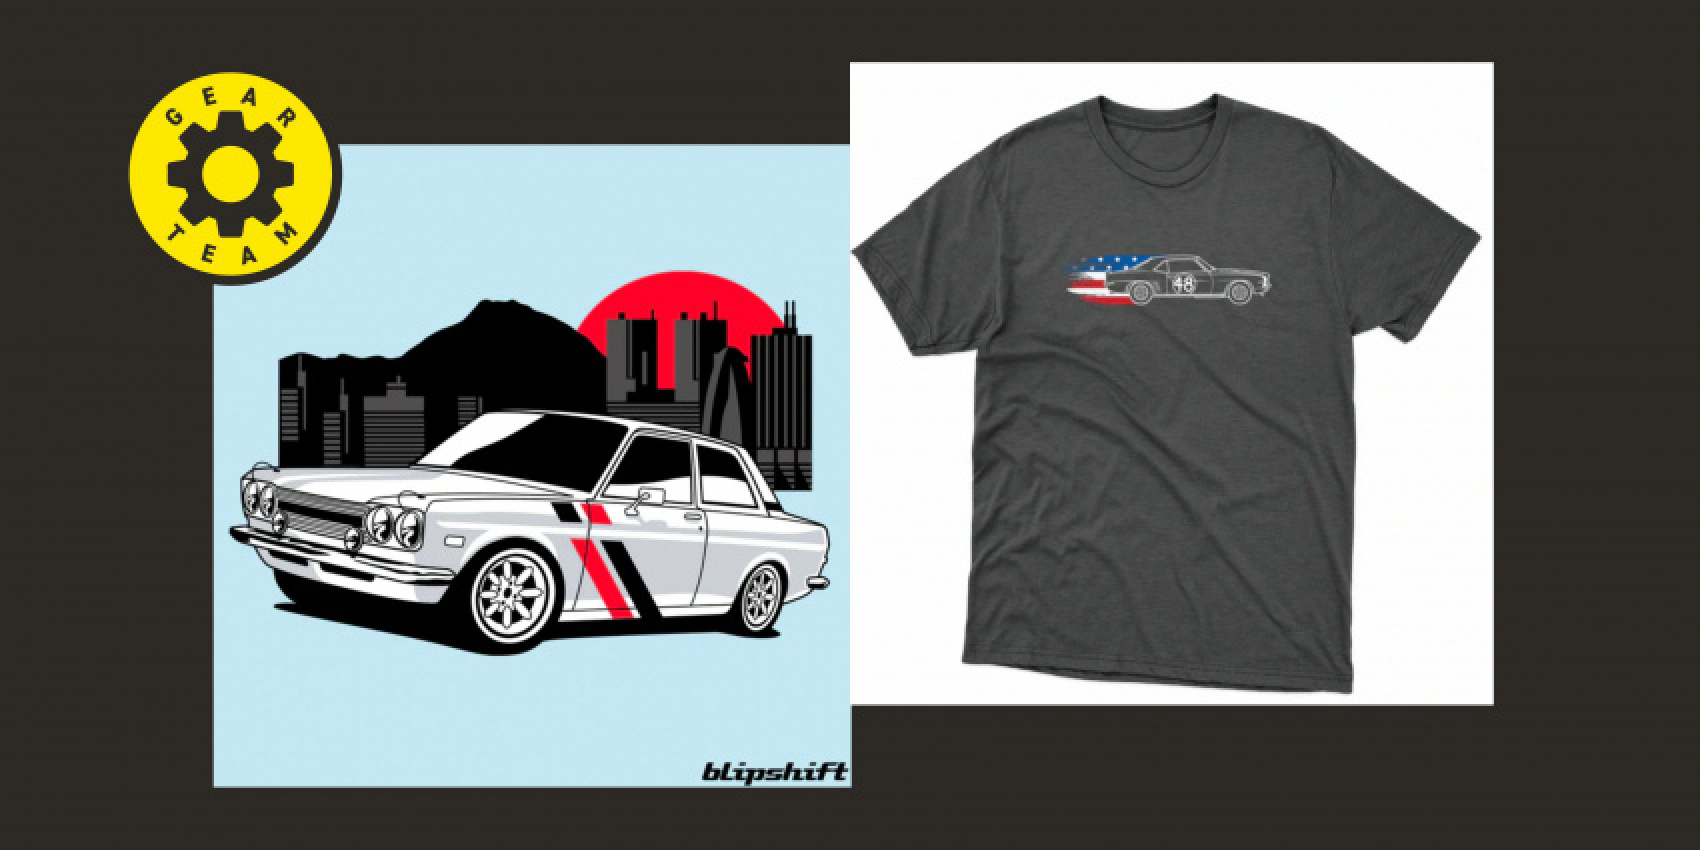 autos, cars, gear, automotive shirt, blipshift, car logo tshirts, car shirt, cool car shirts, cool shirts, custom shirt, graphic tees, shirt design, spring forward with sweet new shirts that show your automotive passion